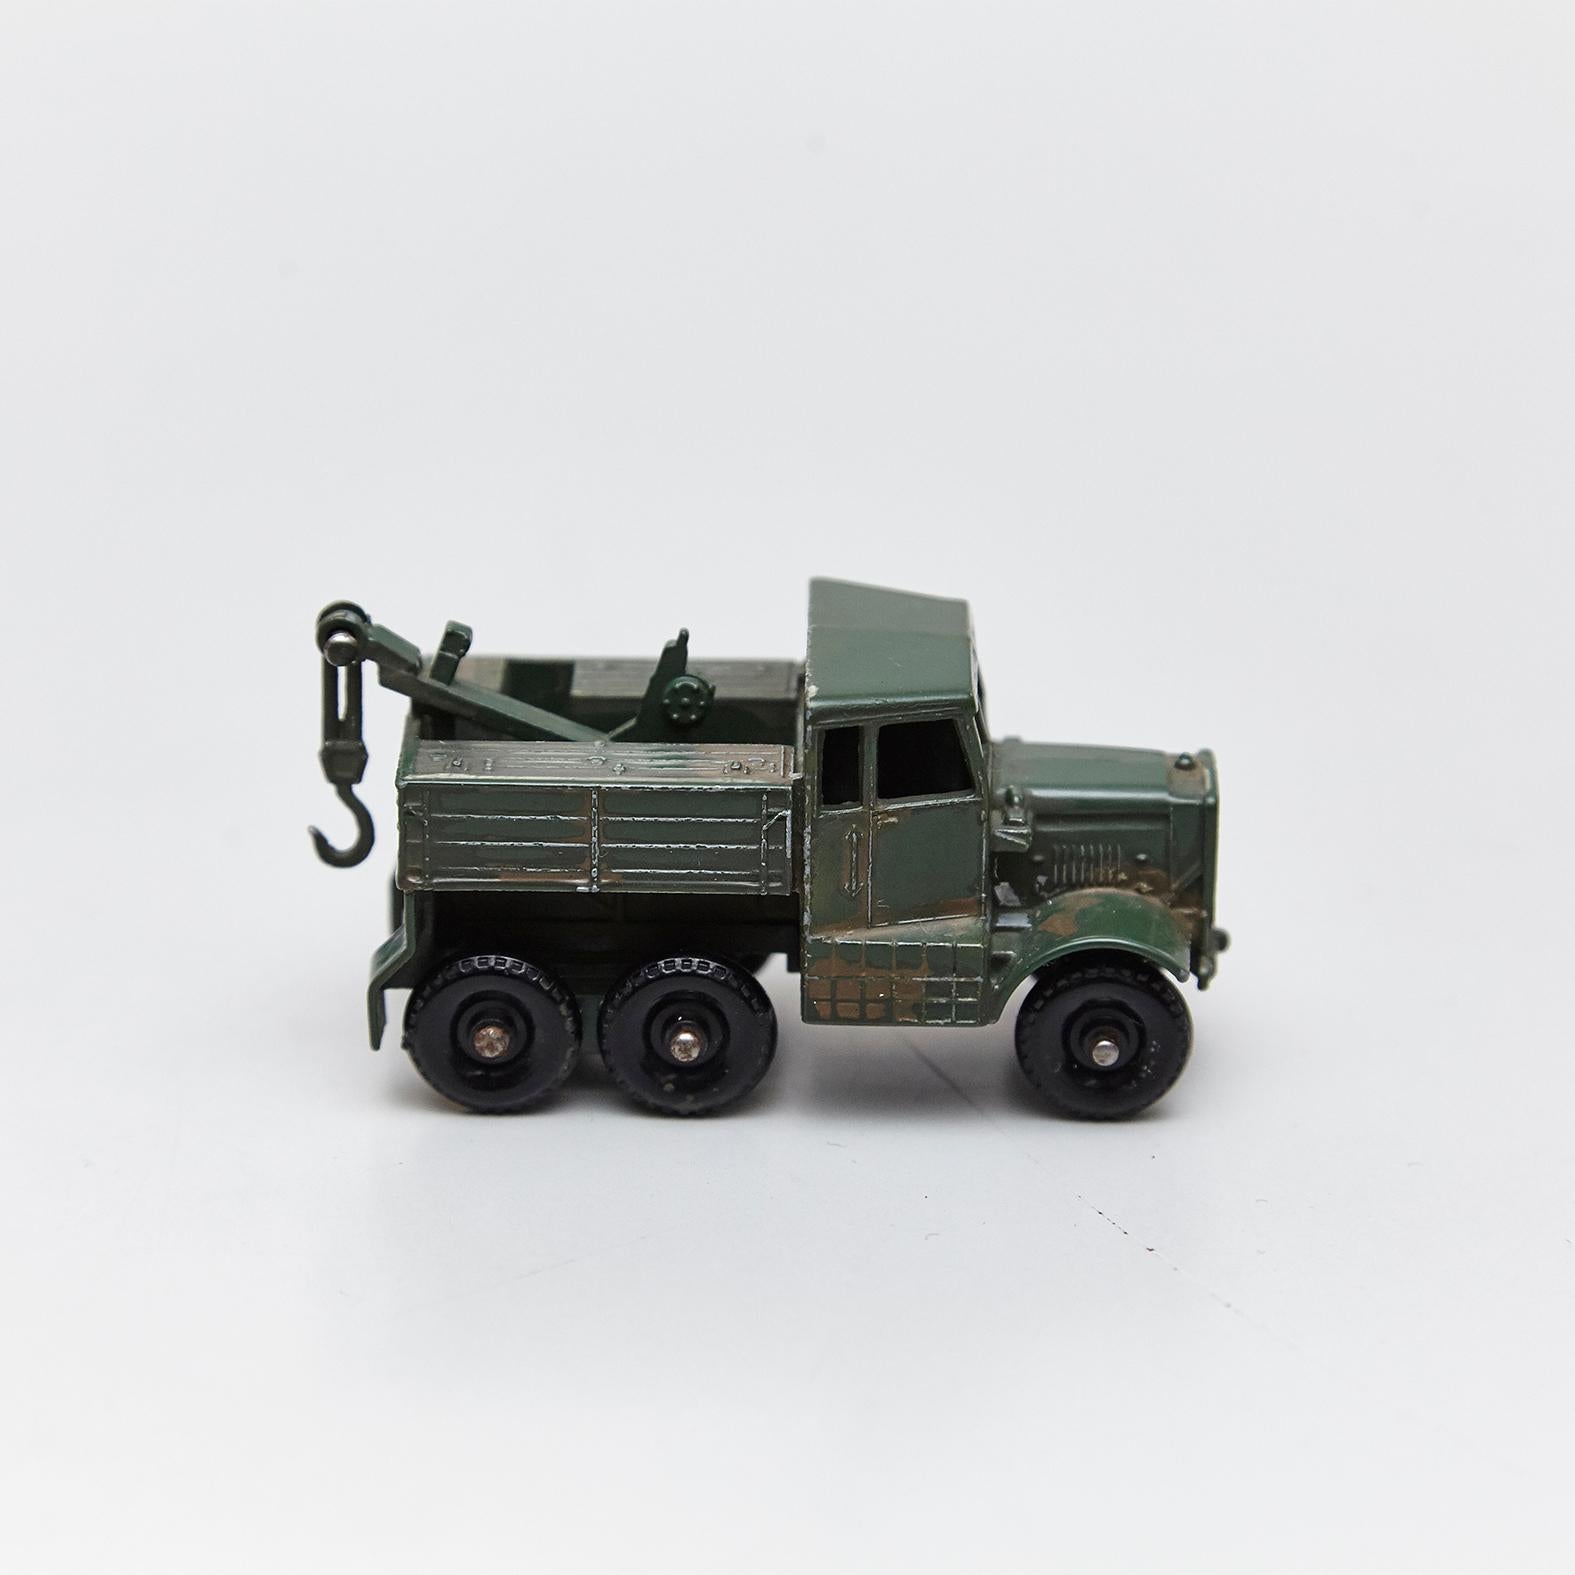 Lesney Matchboxes Series Antique Metal Toy Cars Green Military - Free Shipping 8